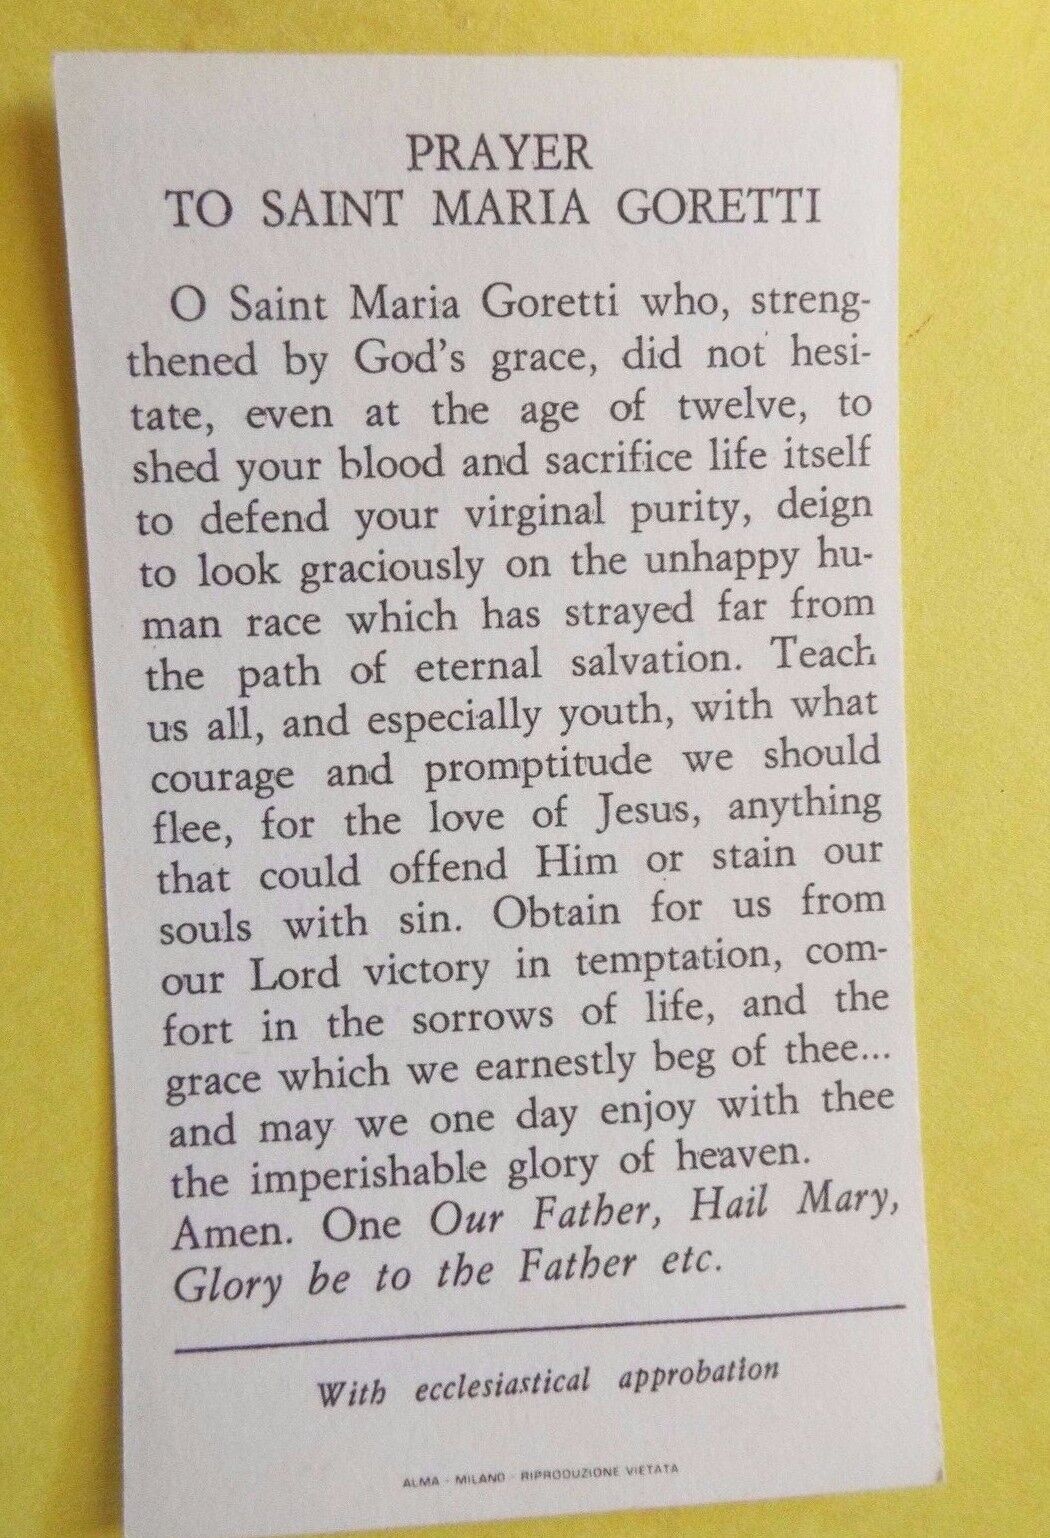 Saint Maria Goretti Authentic Prayer Card, New from Italy - Bob and Penny Lord